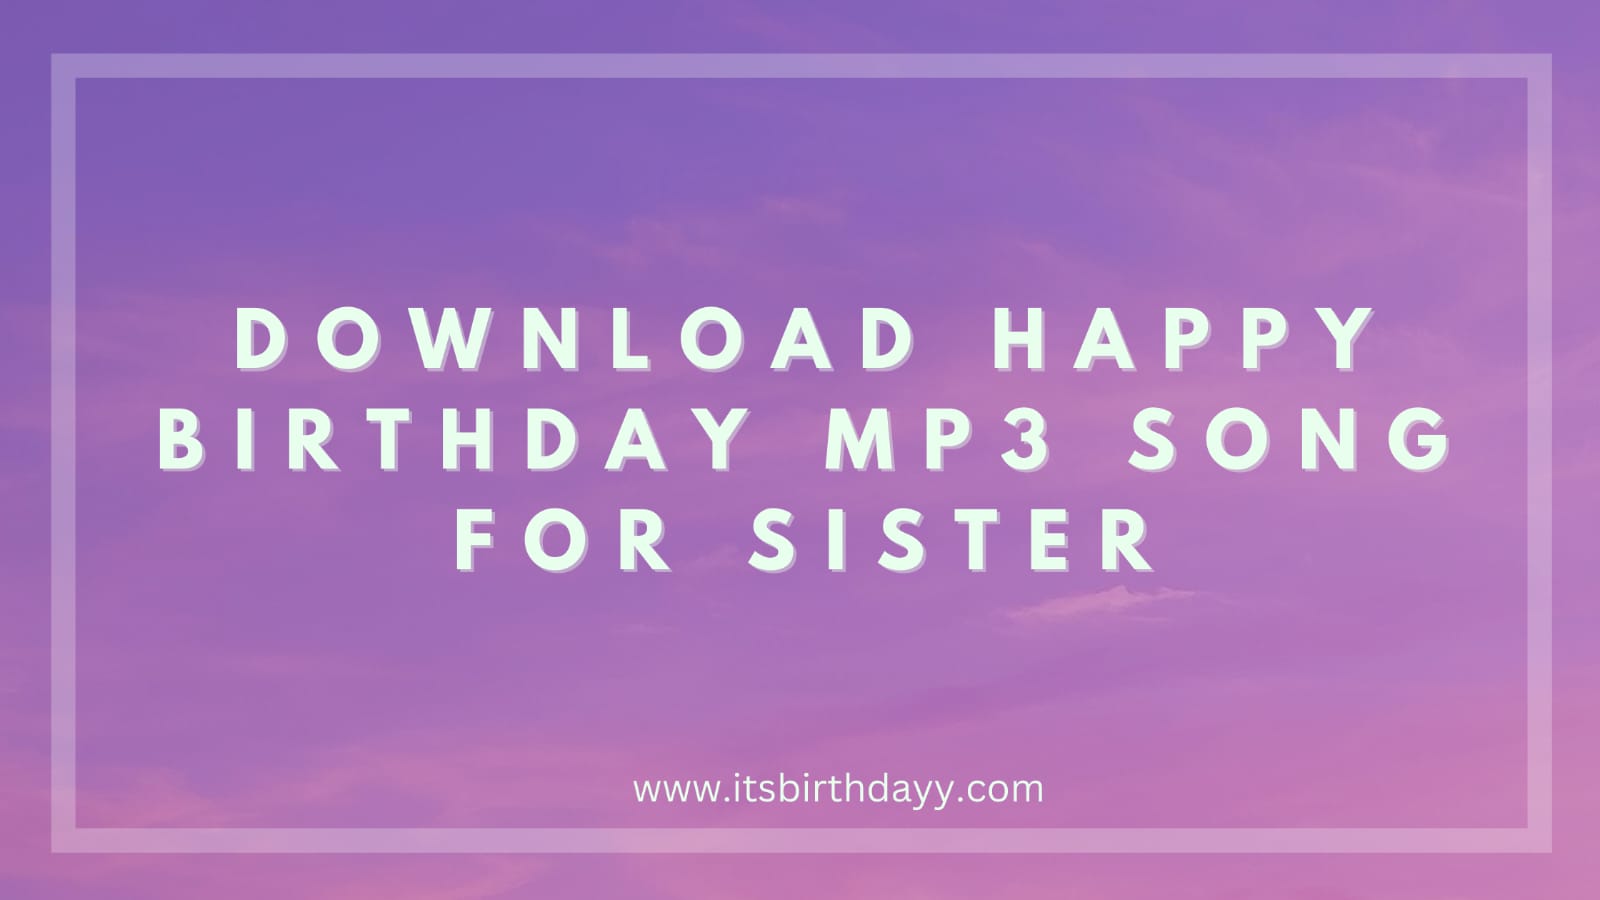 Download Happy Birthday Songs For Sister